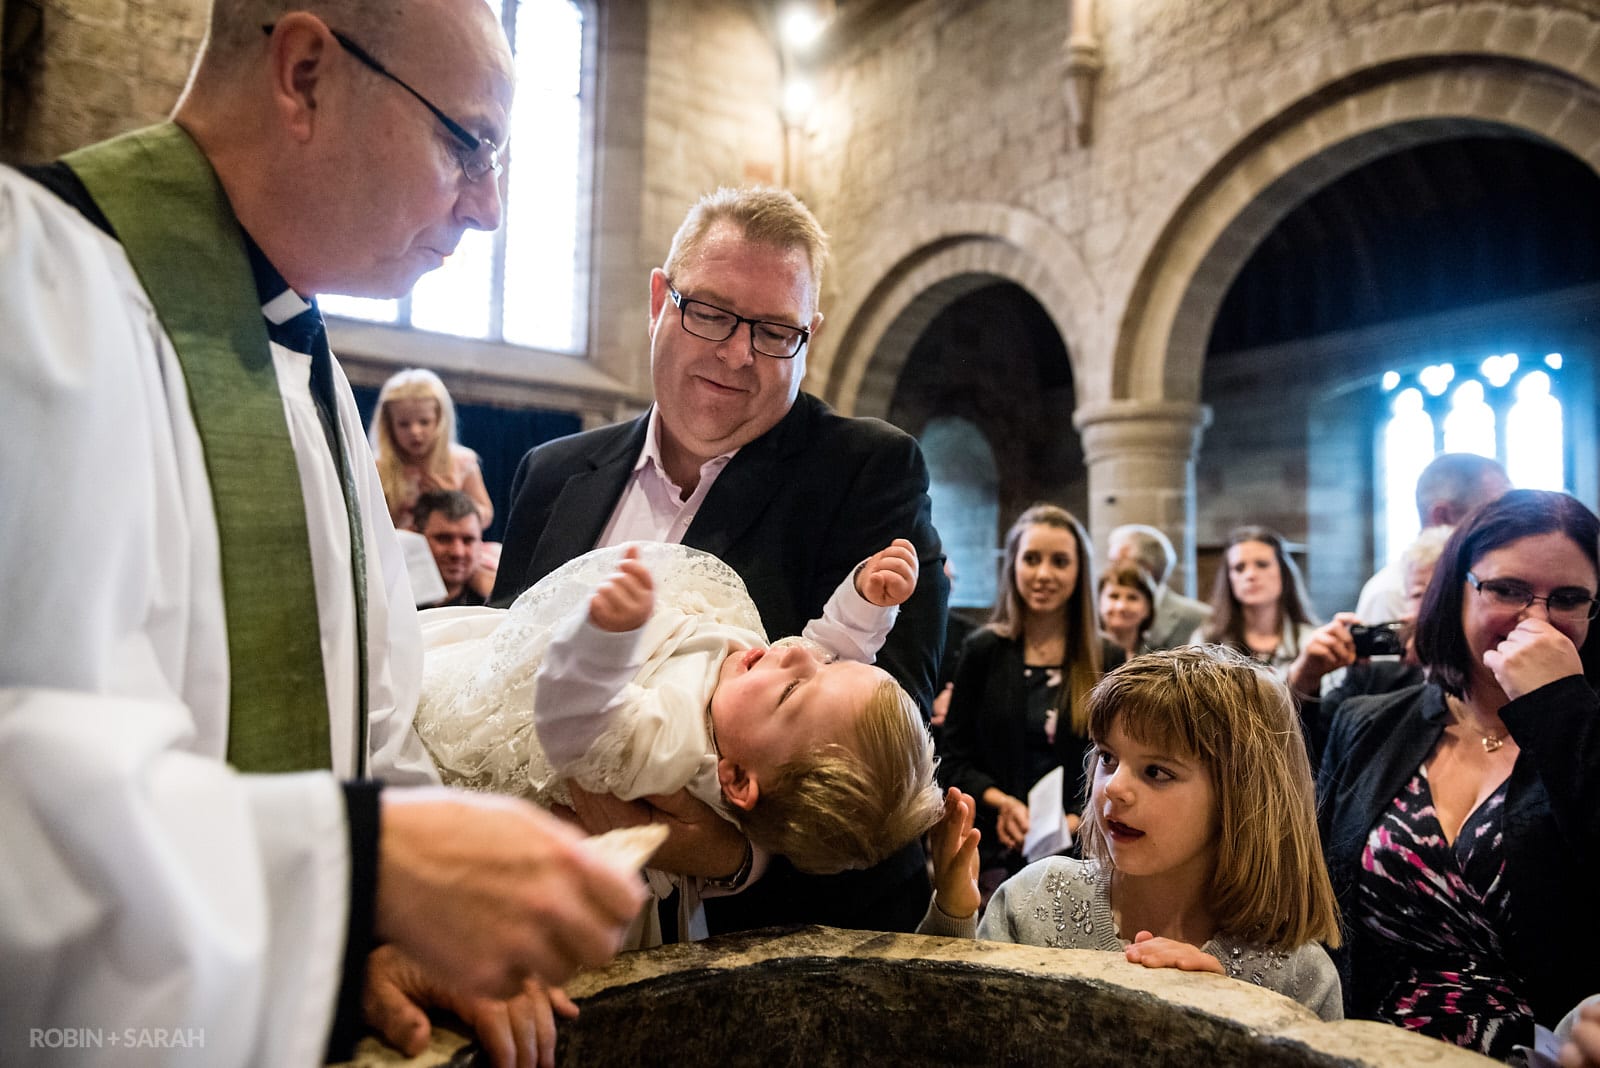 A young baby being christened in church